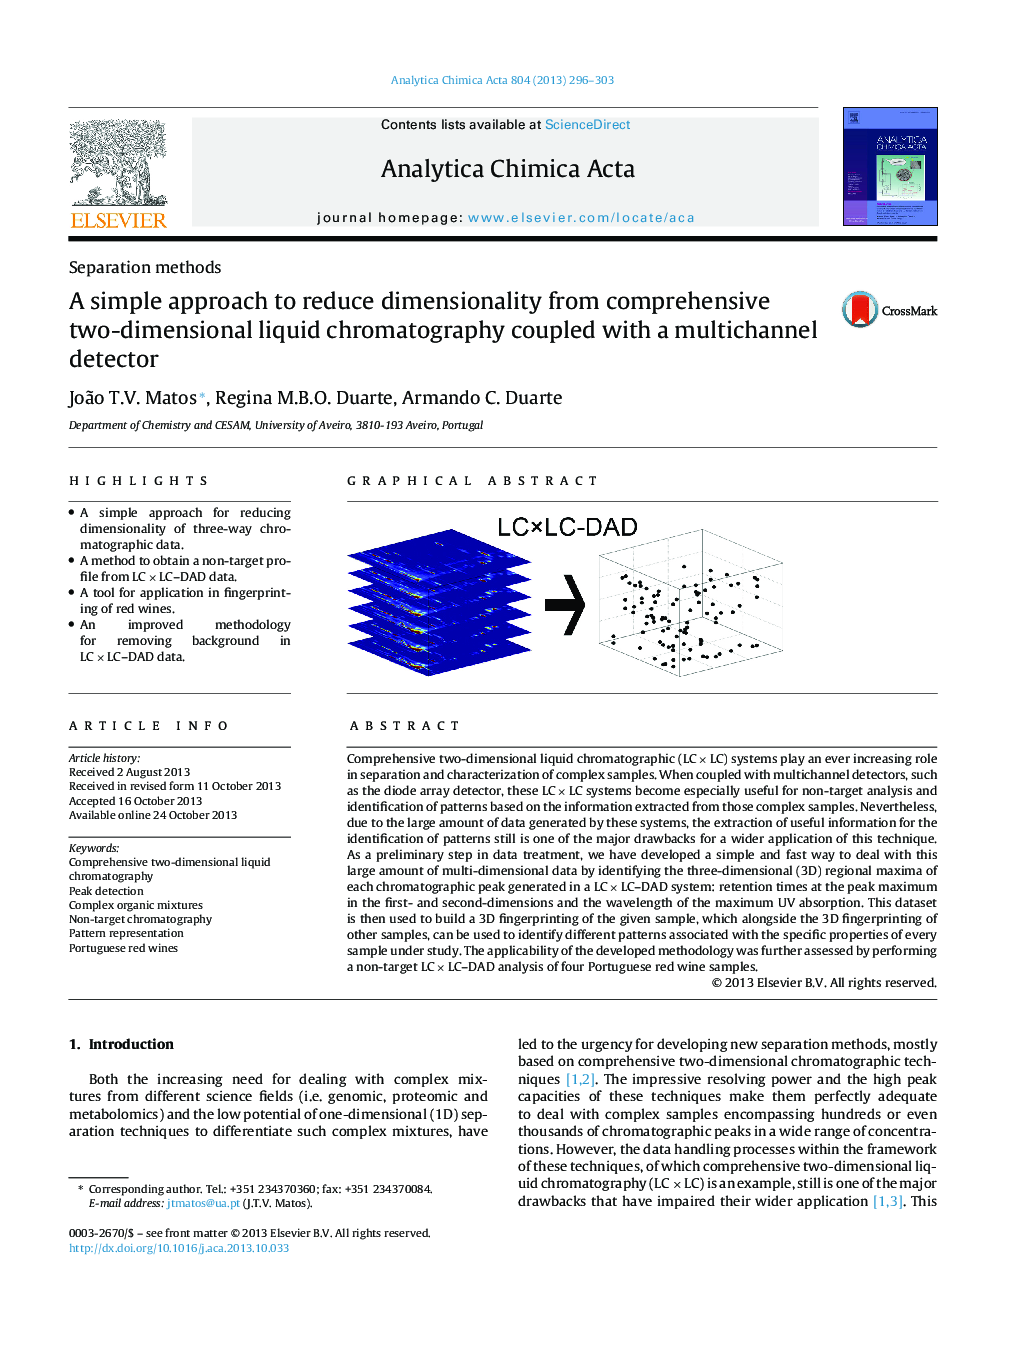 A simple approach to reduce dimensionality from comprehensive two-dimensional liquid chromatography coupled with a multichannel detector